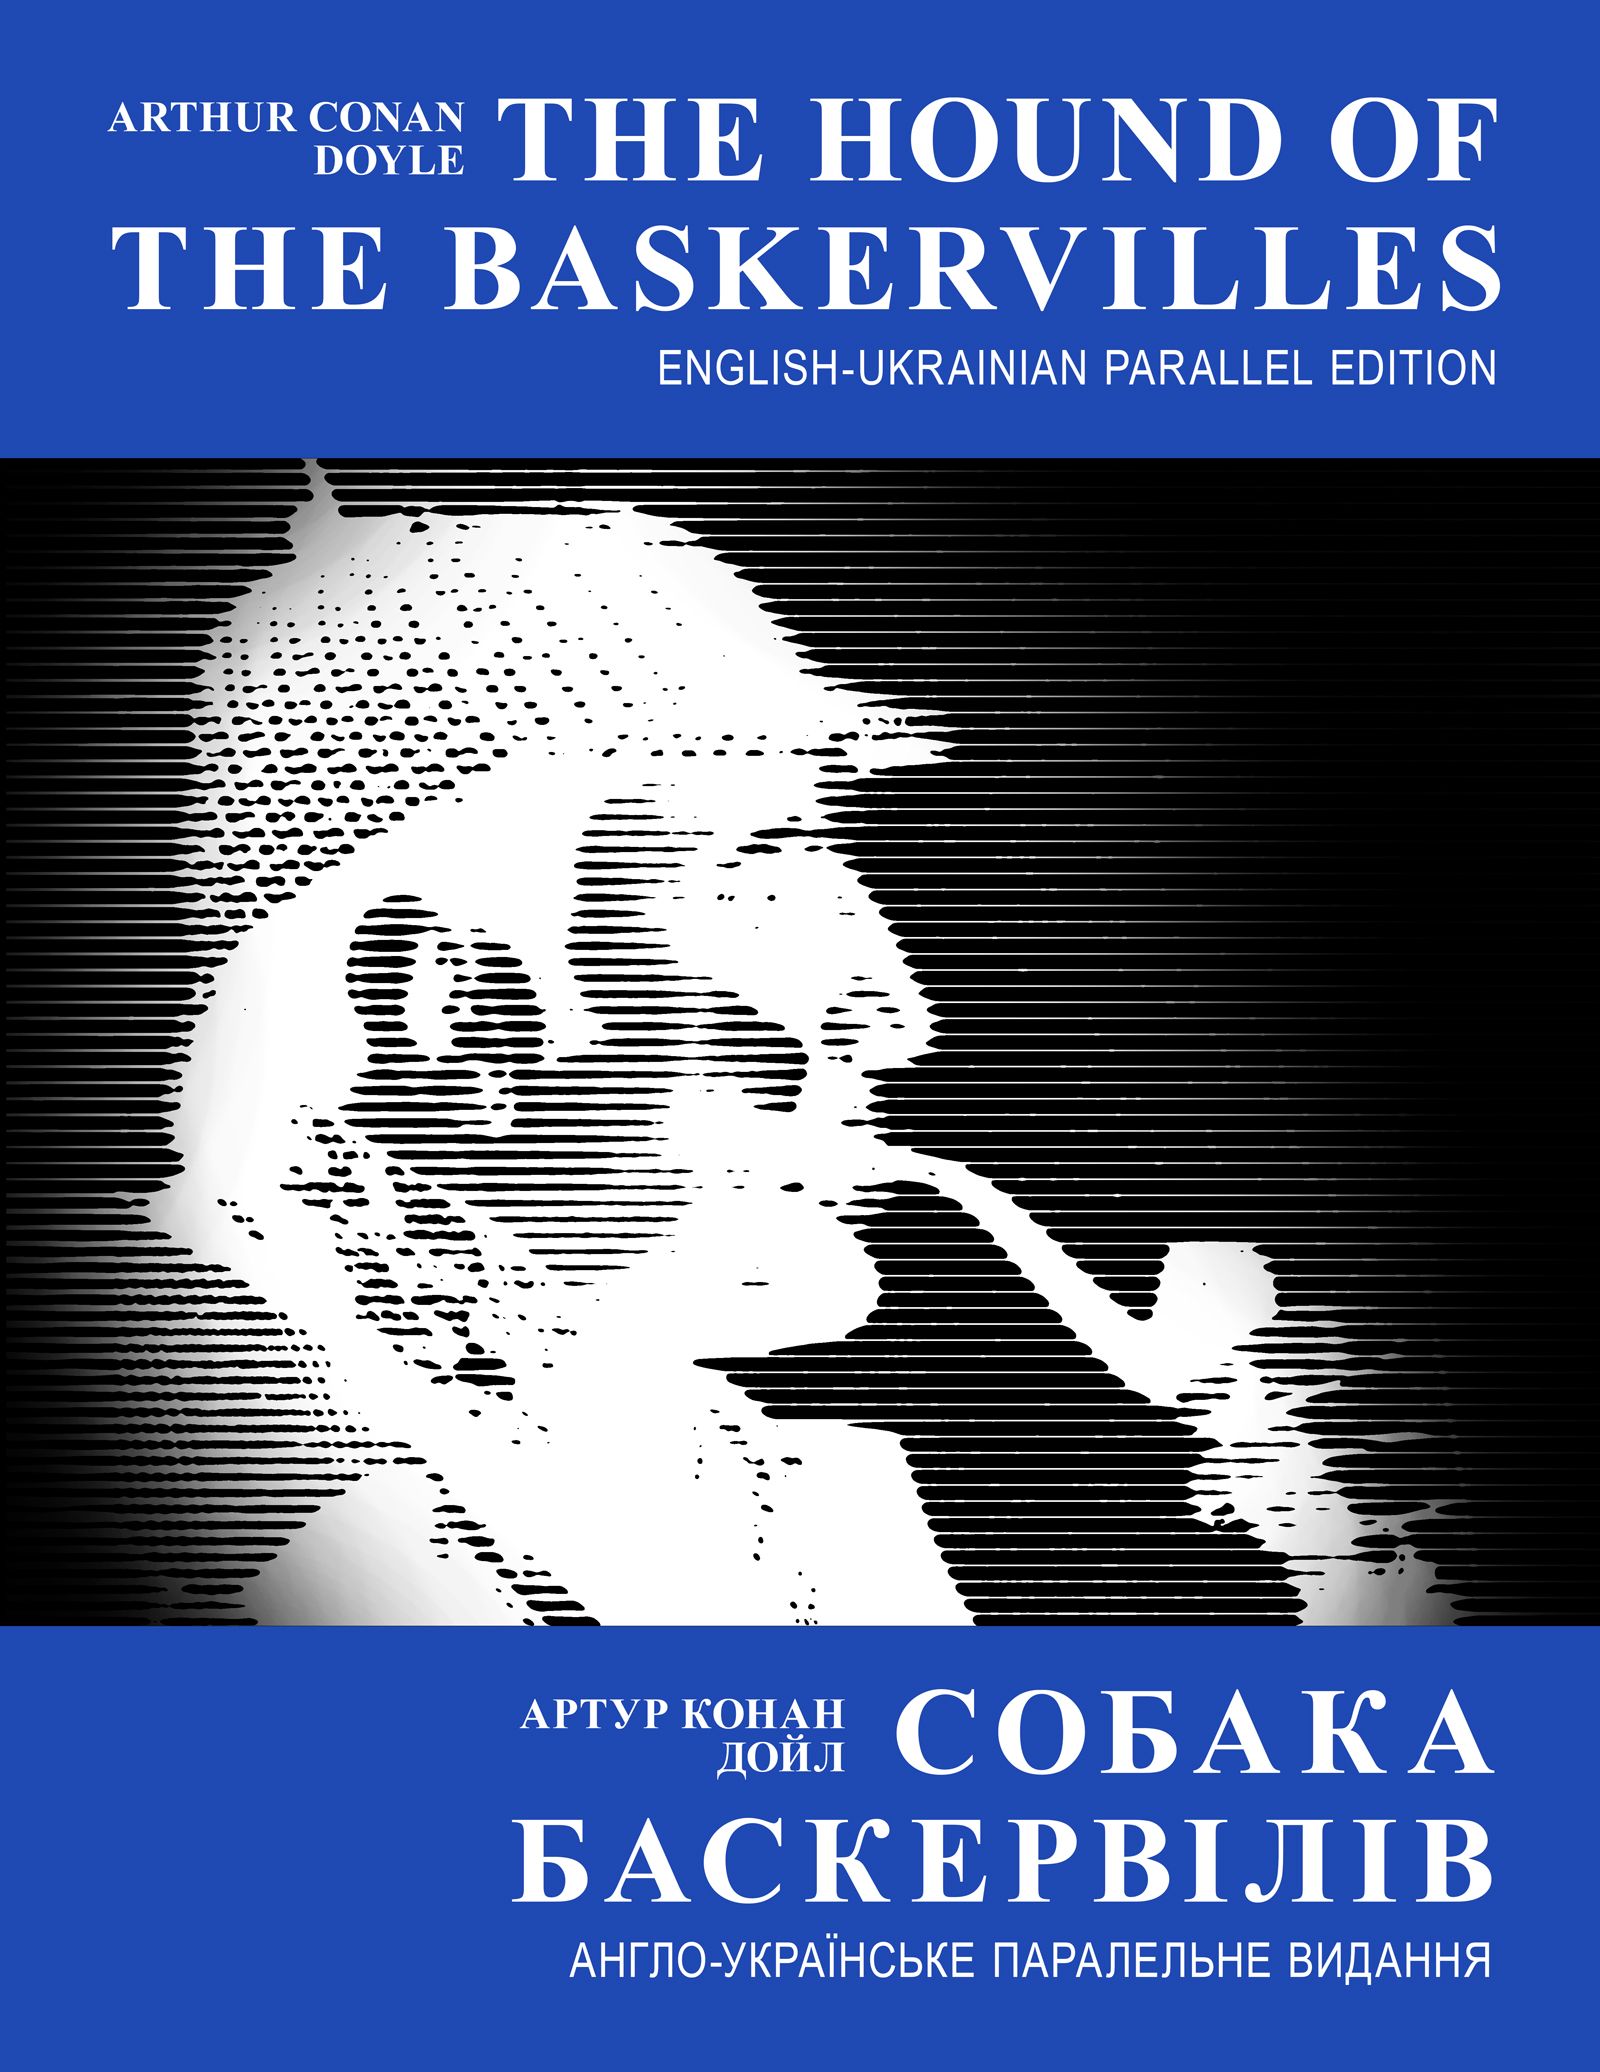 The Hound of the Baskervilles (English-Ukrainian Parallel Edition with Illustrations) (Paperback)'s Book Image